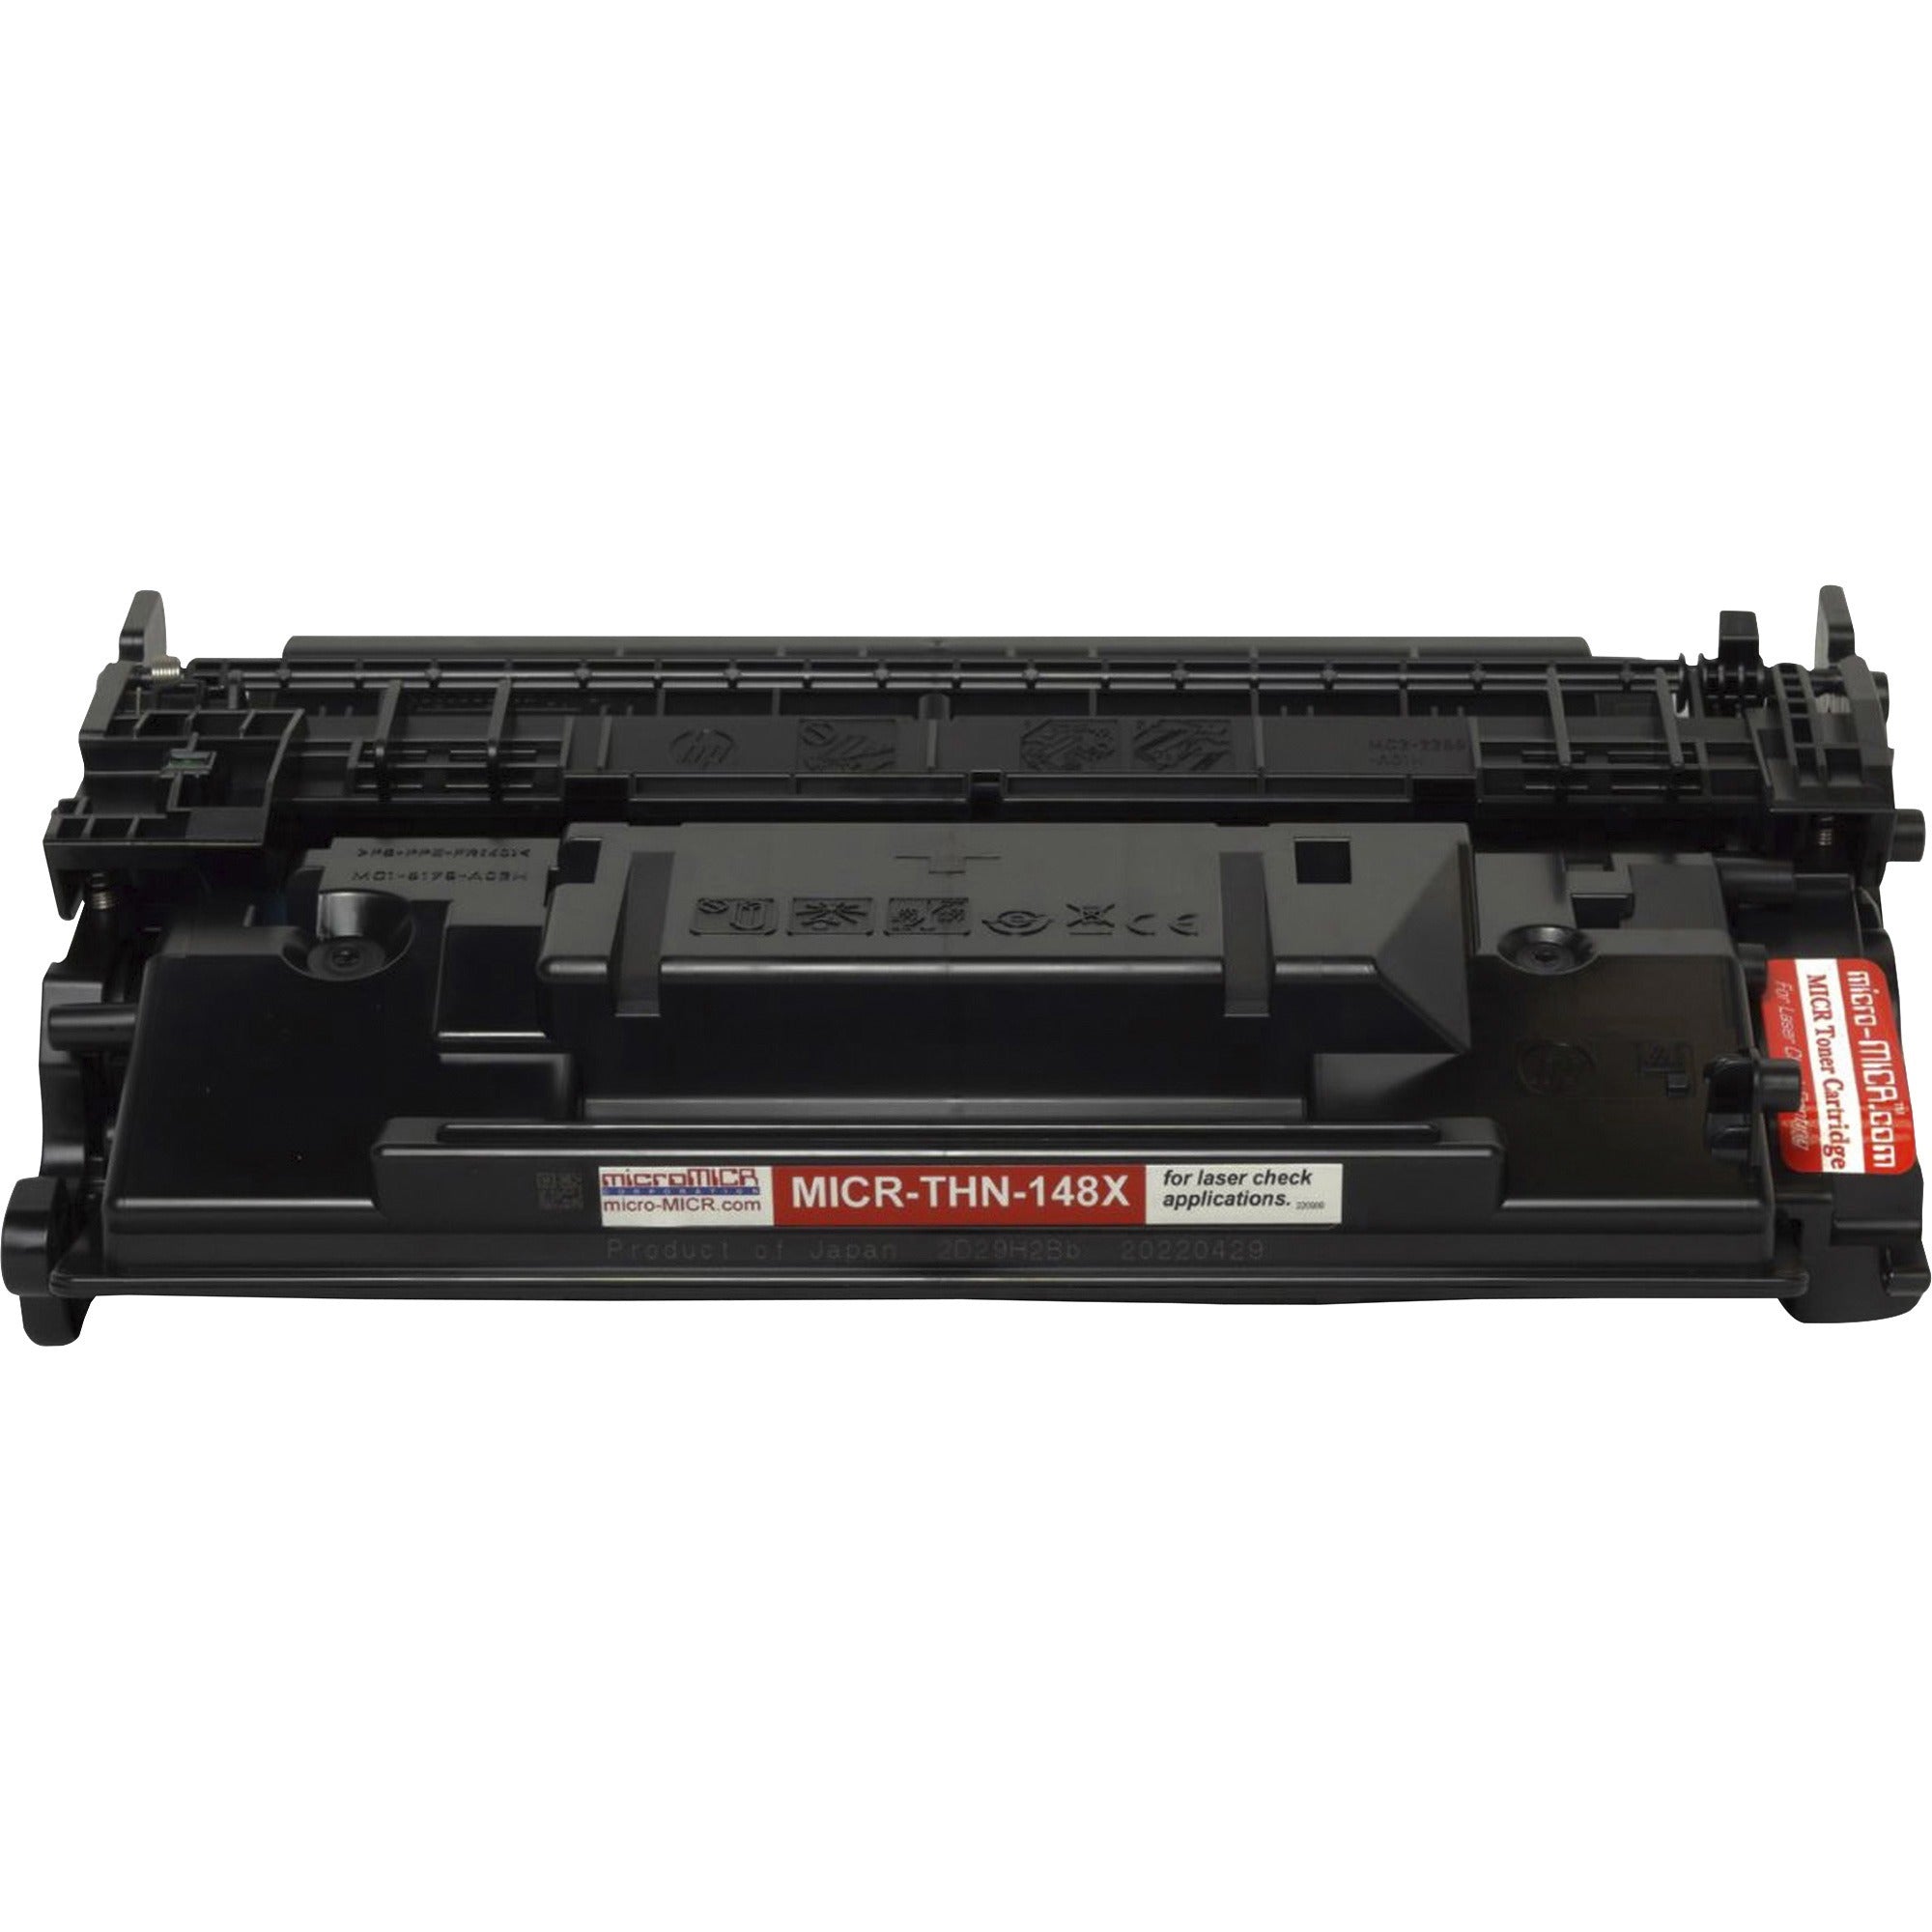 micromicr-micr-high-yield-laser-toner-cartridge-alternative-for-hp-148x-148a-w1480a-black-1-each-9500-pages_mcmmicrthn148x - 1